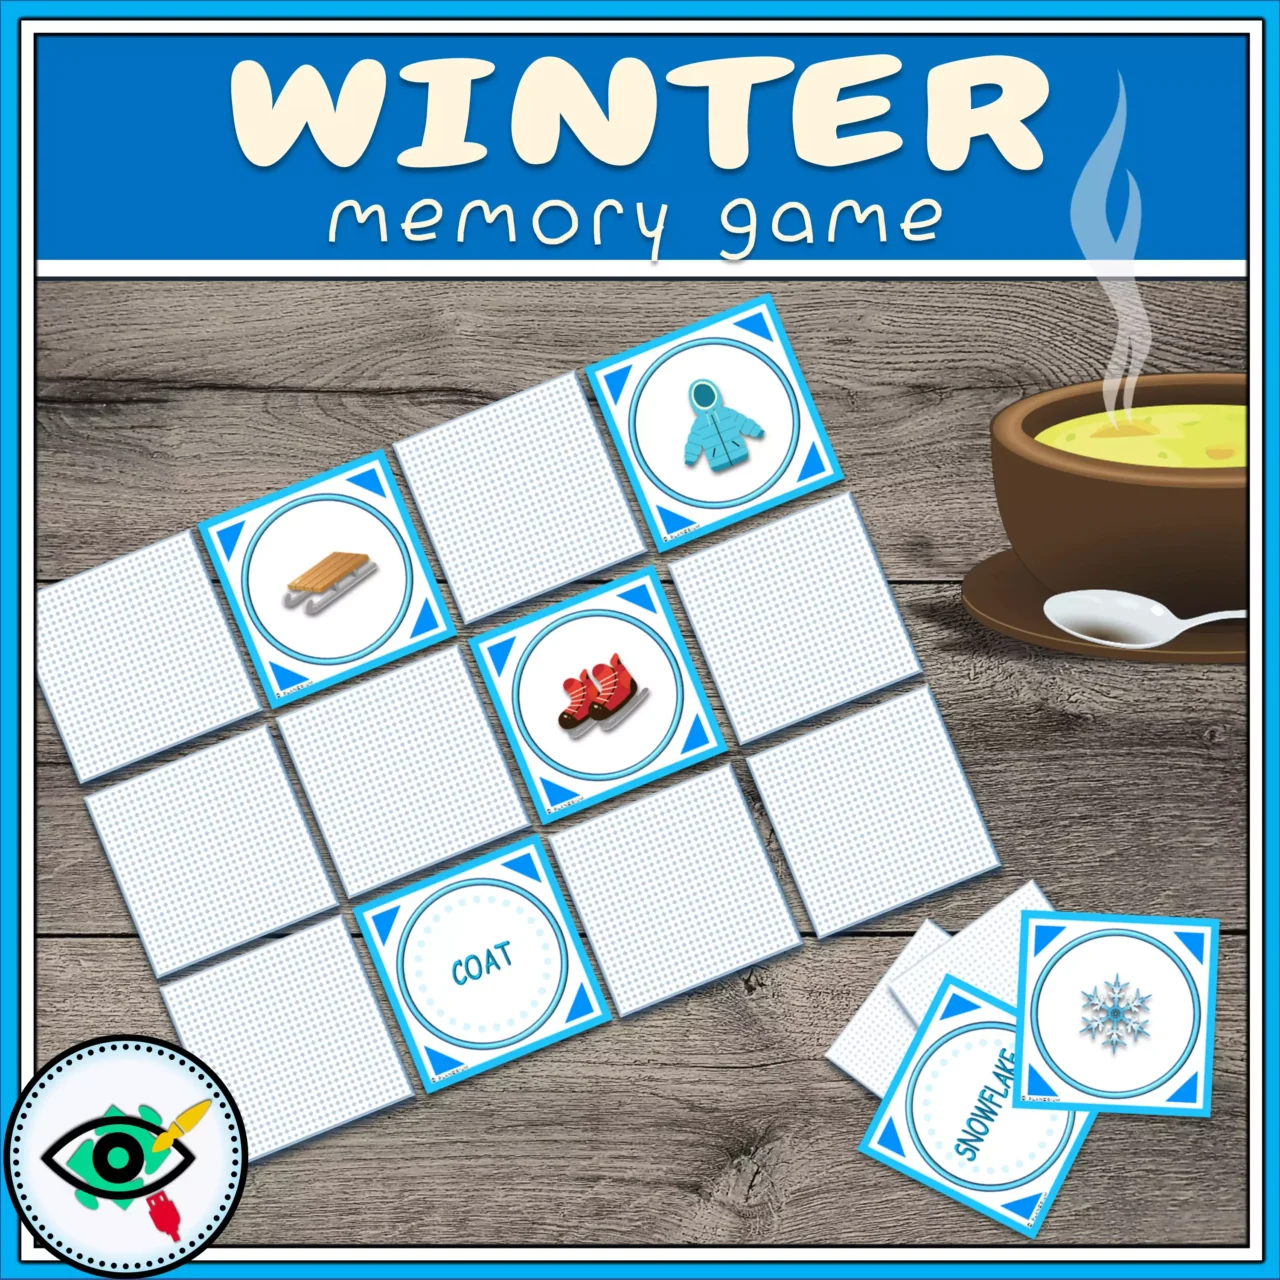 Winter - Memory Game - Image Title 6